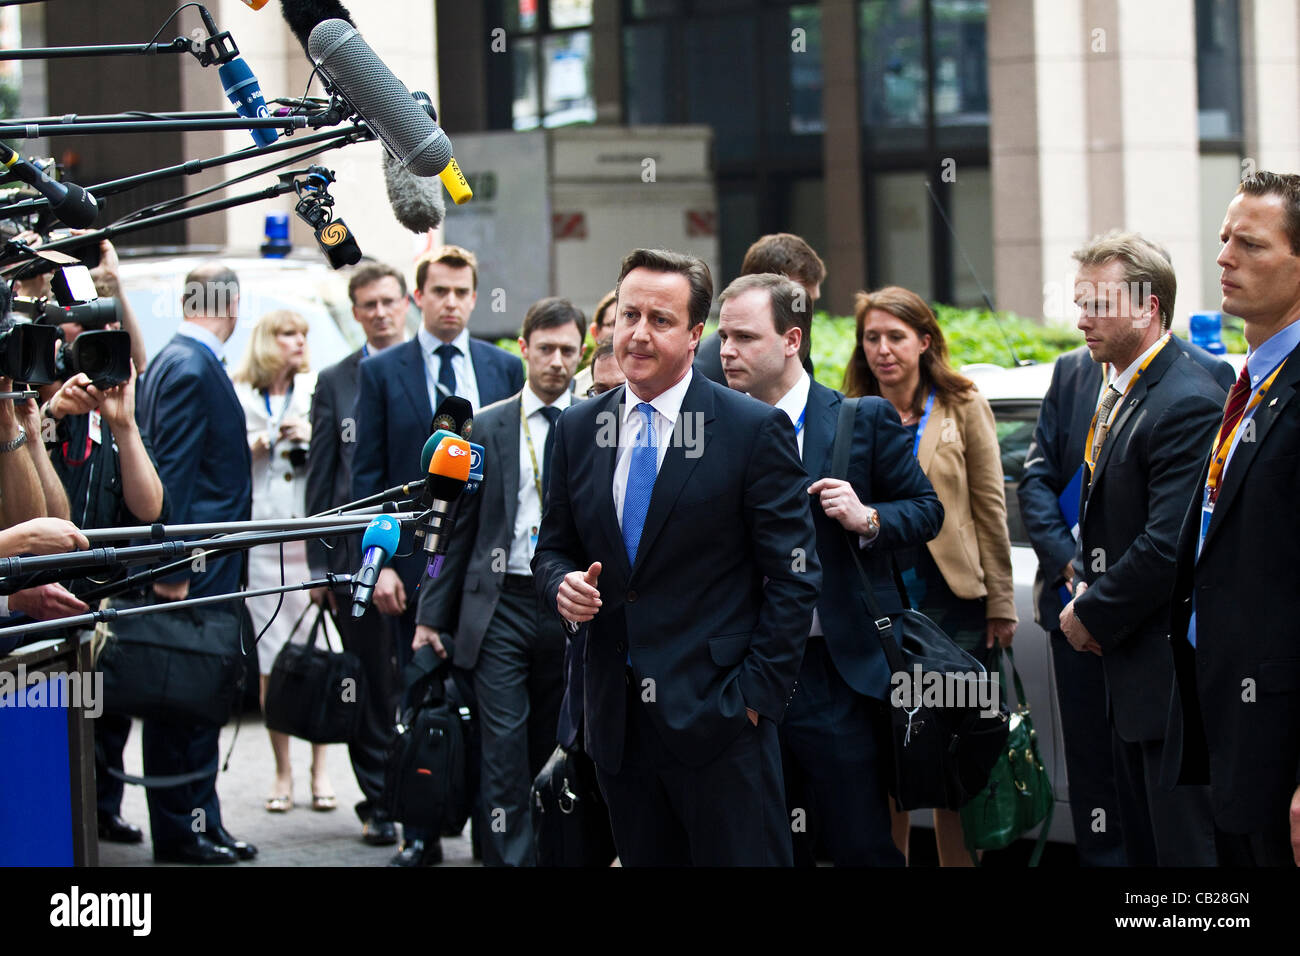 Brussels, Belgium. 23.05.2012 Picture shows David Cameron, British Prime Minister arriving at the Informal Dinner of Heads of State or Government for member nations of the EU, Brussels, Belgium Stock Photo